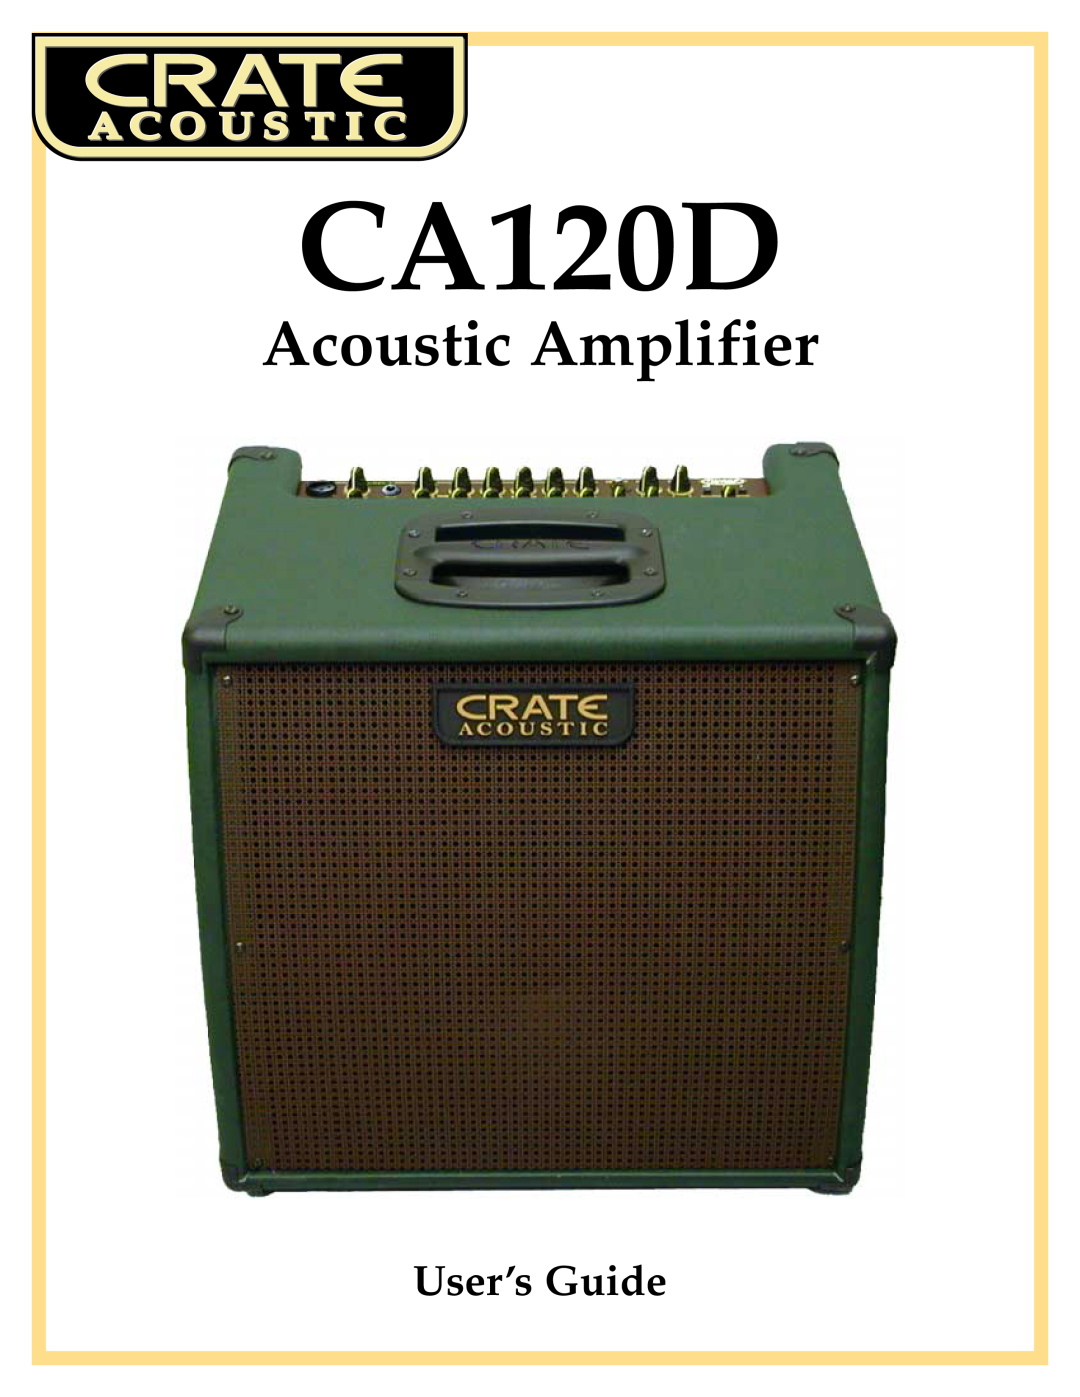 Crate Amplifiers CA120D manual Acoustic Amplifier, User’s Guide 